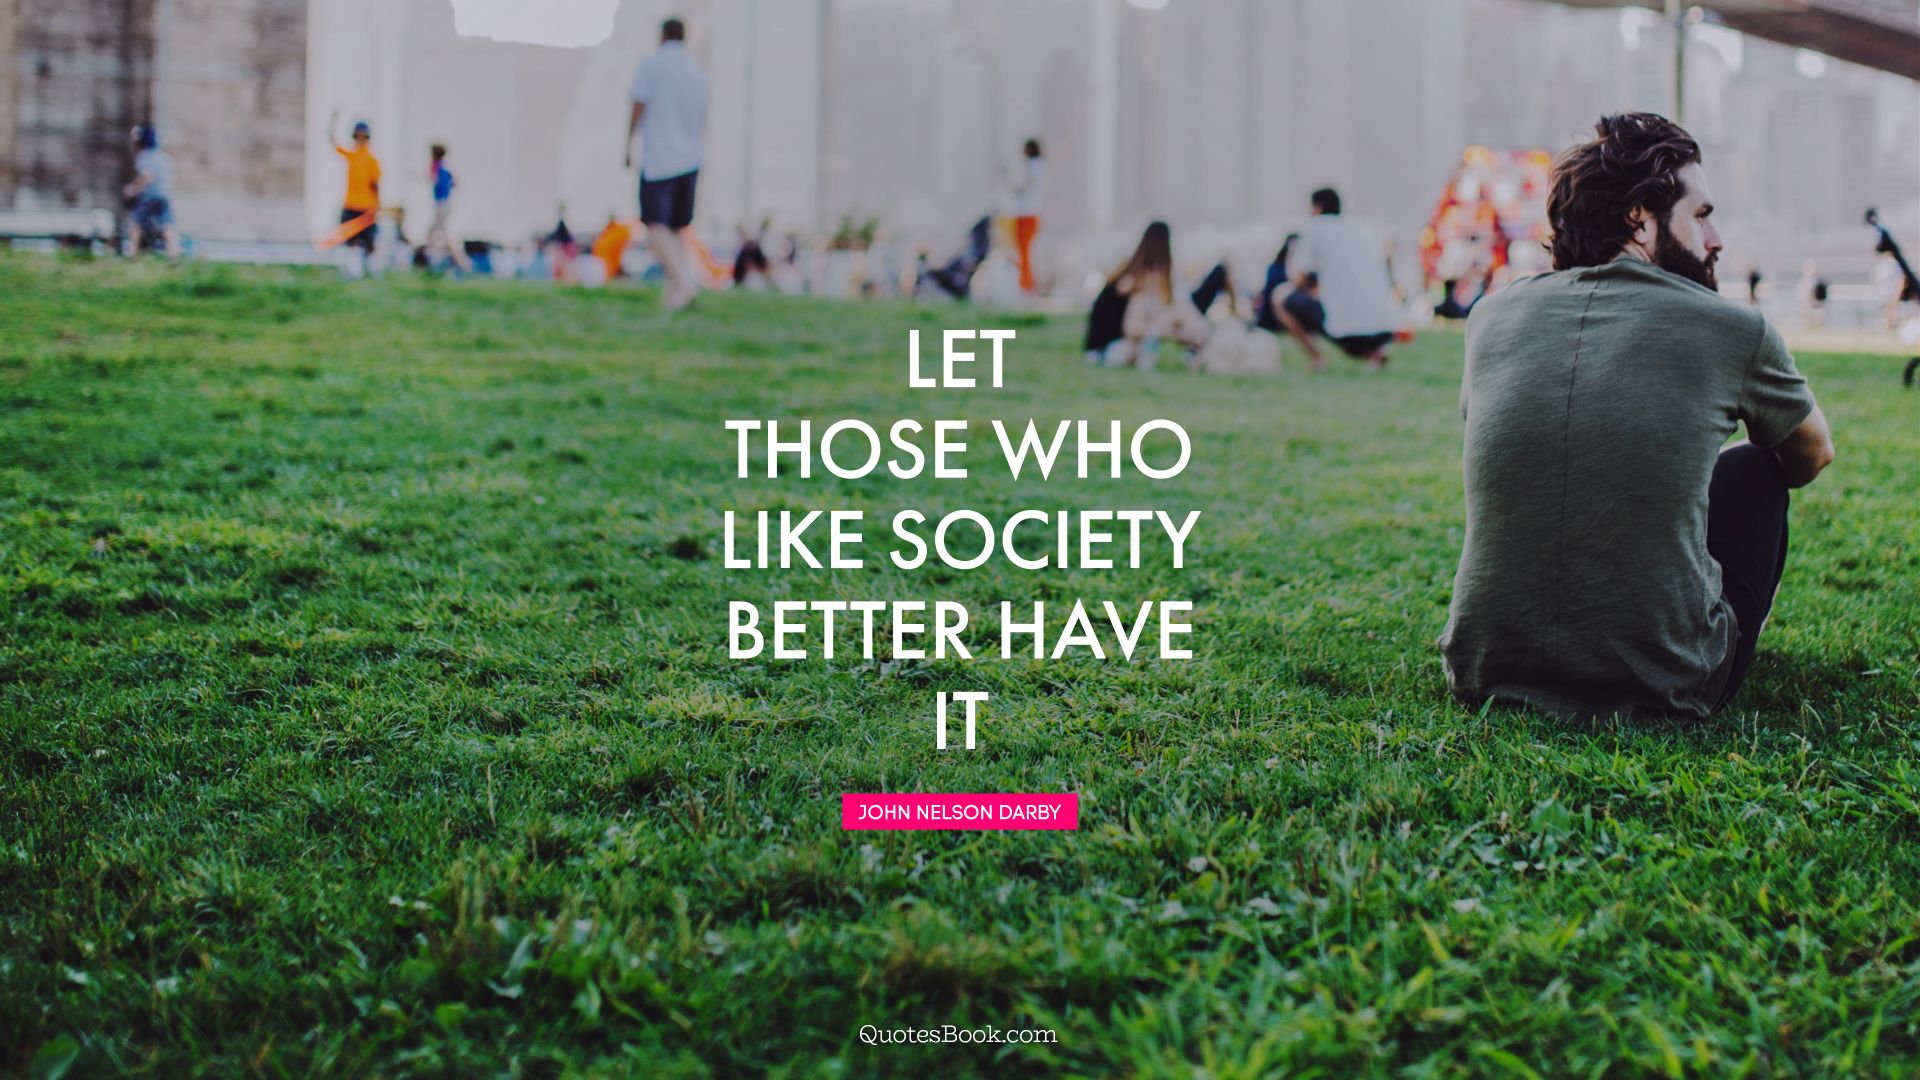 Let those who like society better have it. - Quote by John Nelson Darby